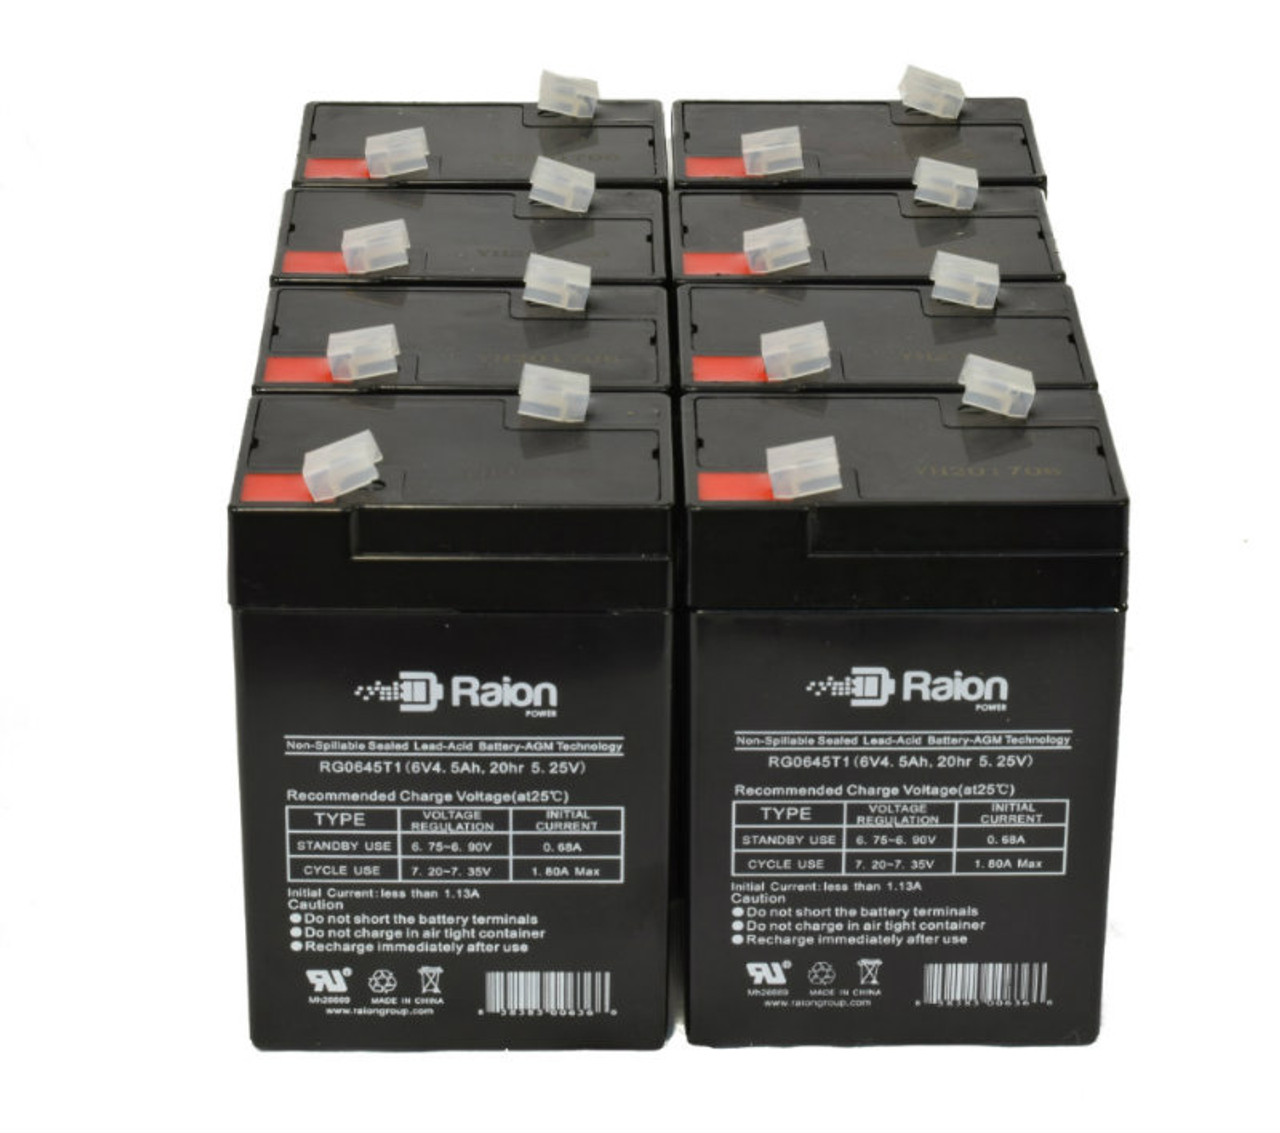 Raion Power 6 Volt 4.5Ah RG0645T1 Replacement Battery for Raion Power RG0645T1 - 8 Pack